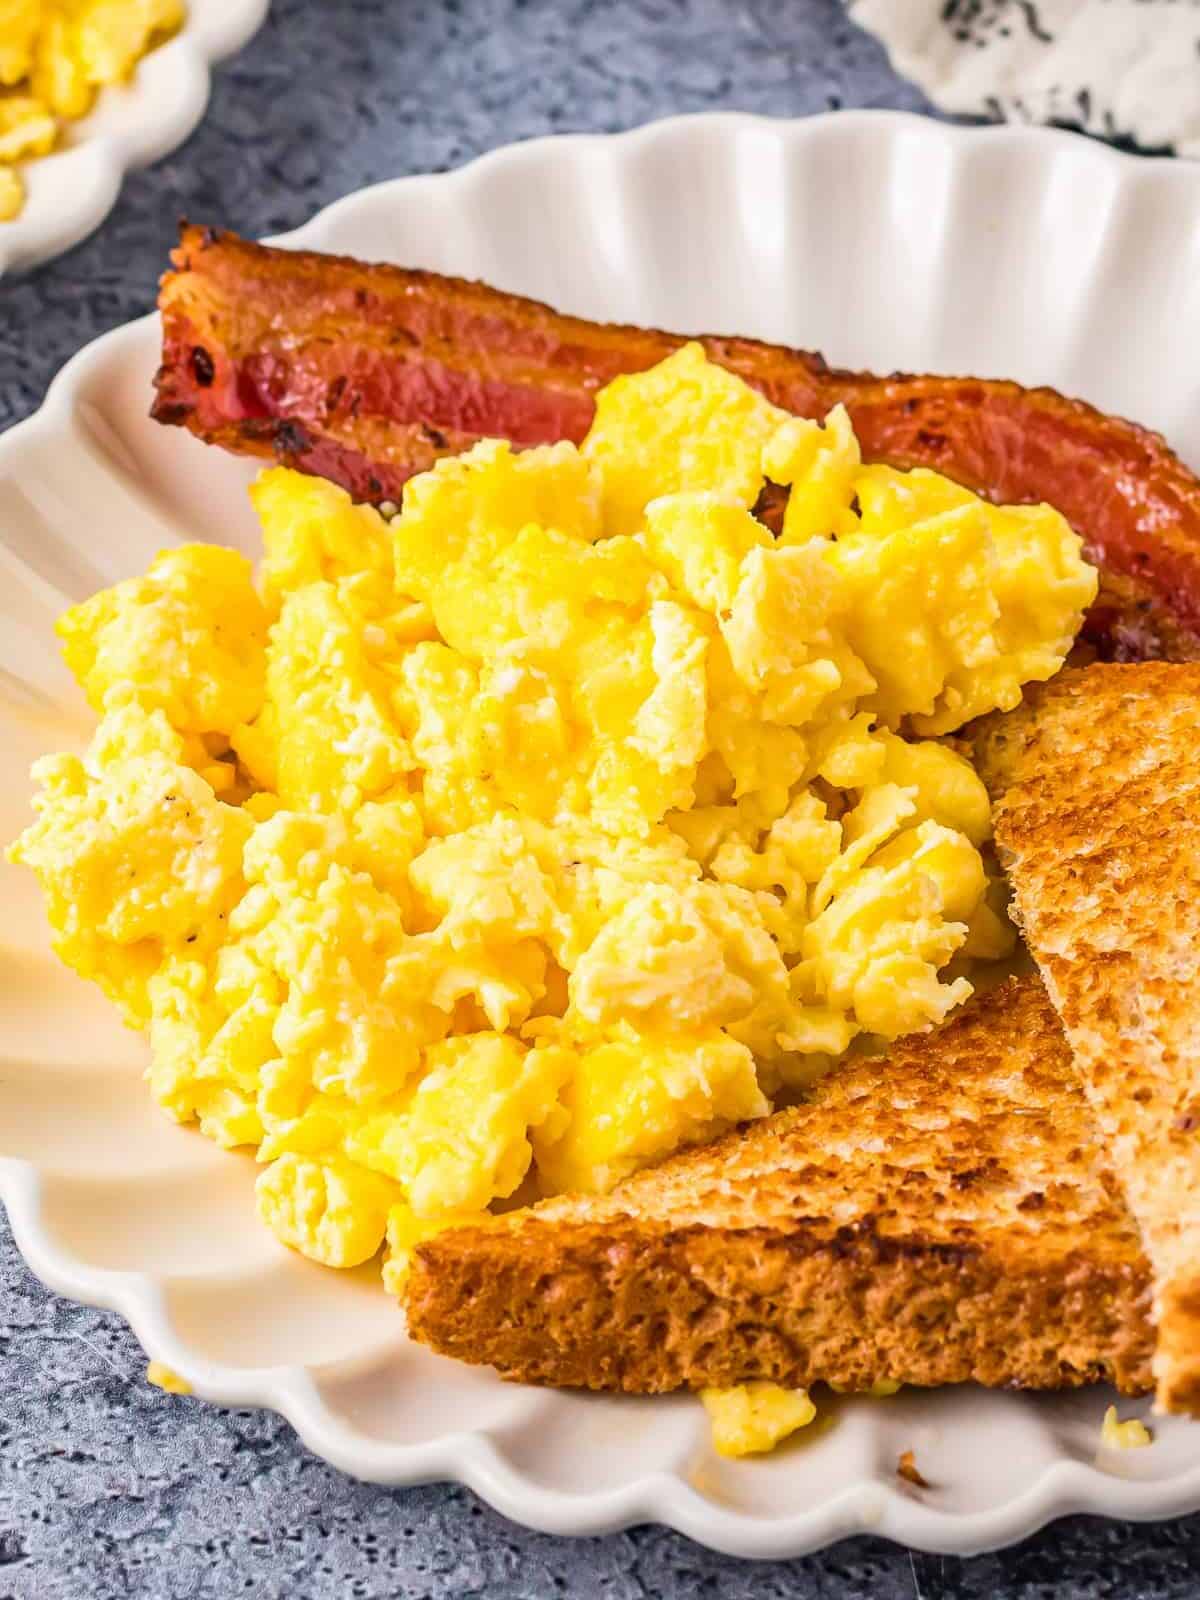 three-quarters view of scrambled eggs on a white plate with toast and bacon.